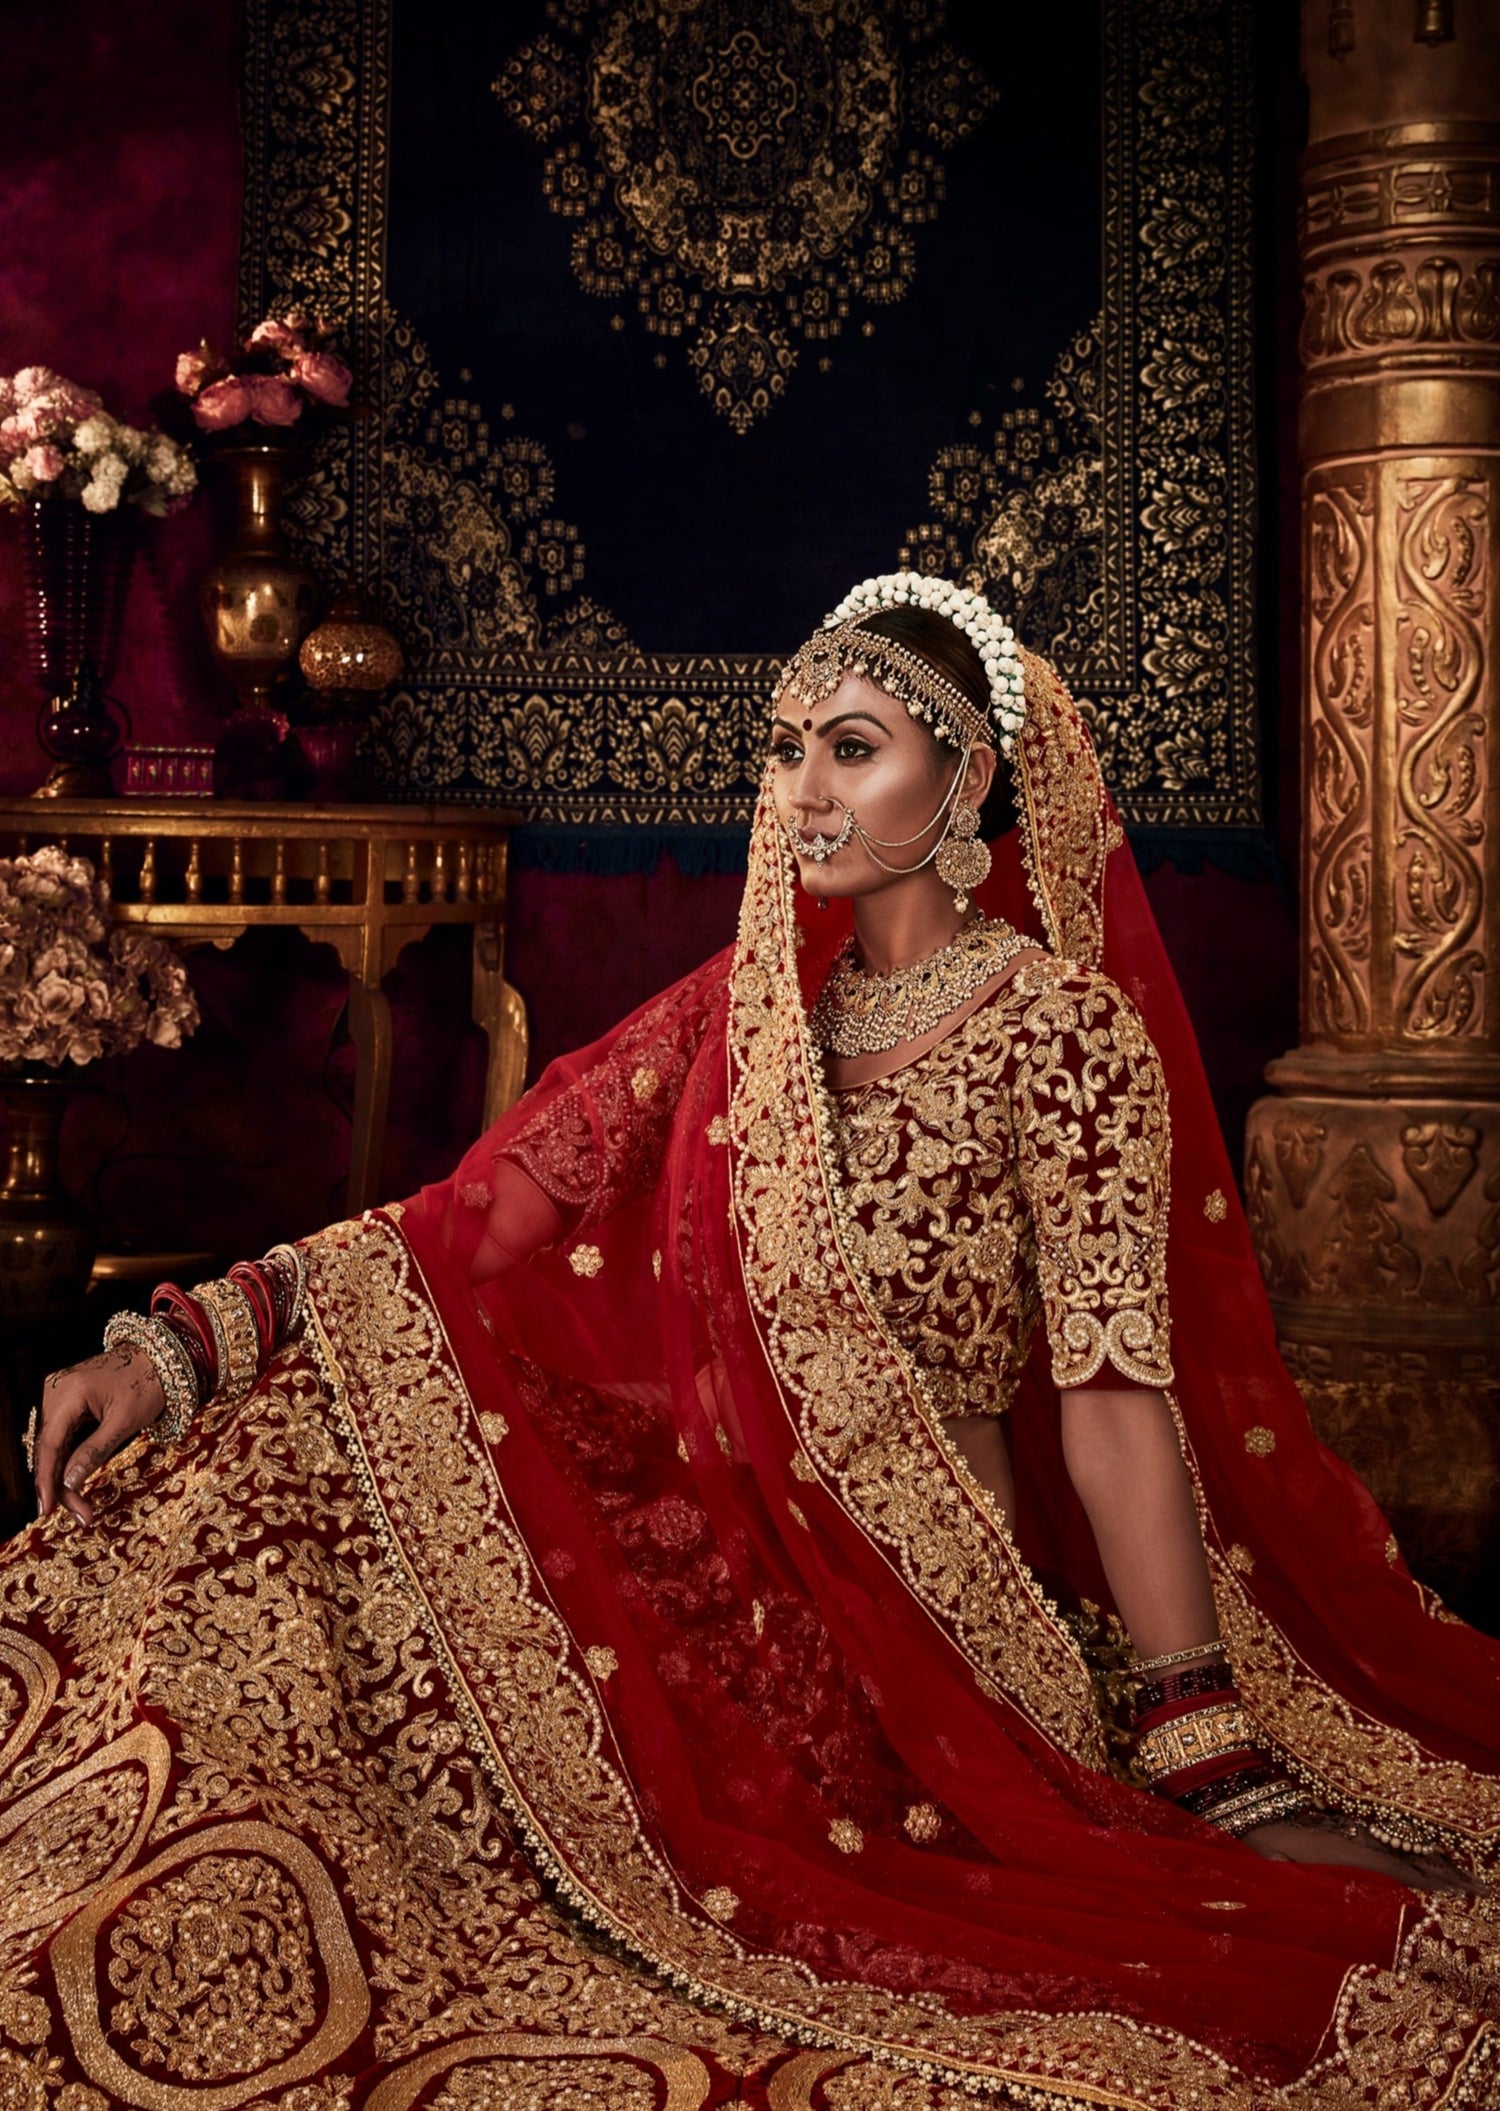 Bridal lehenga colours for wedding reception, other than red and pink |  EconomicTimes